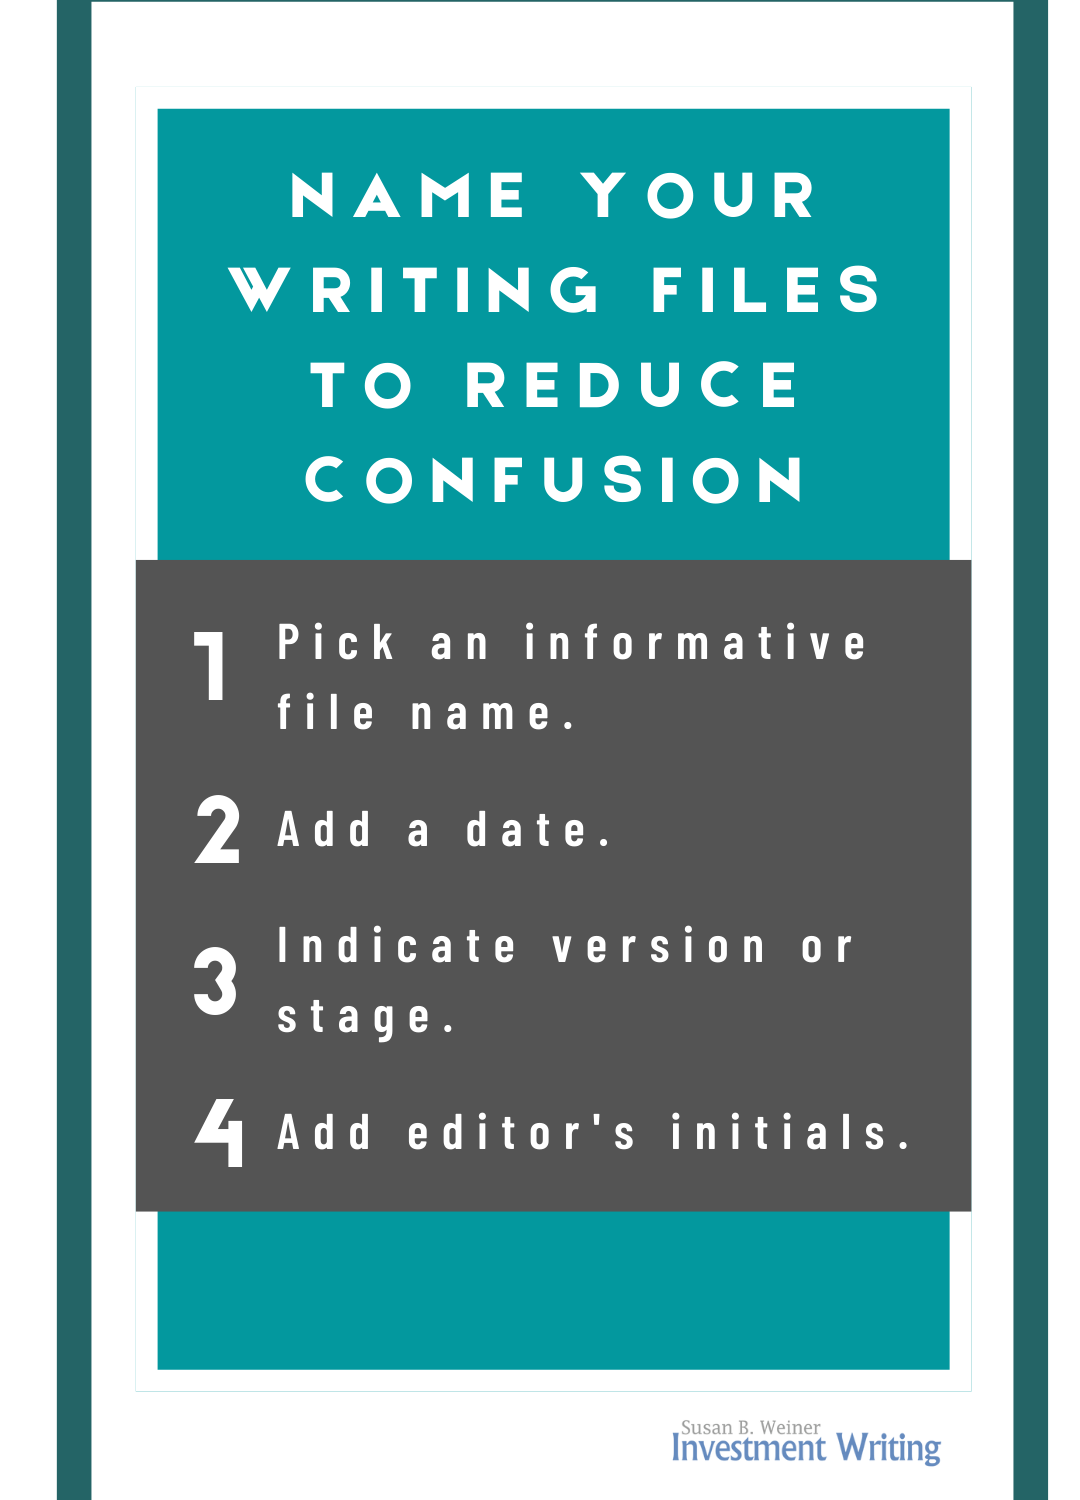 Name your writing files to reduce confusion infographic